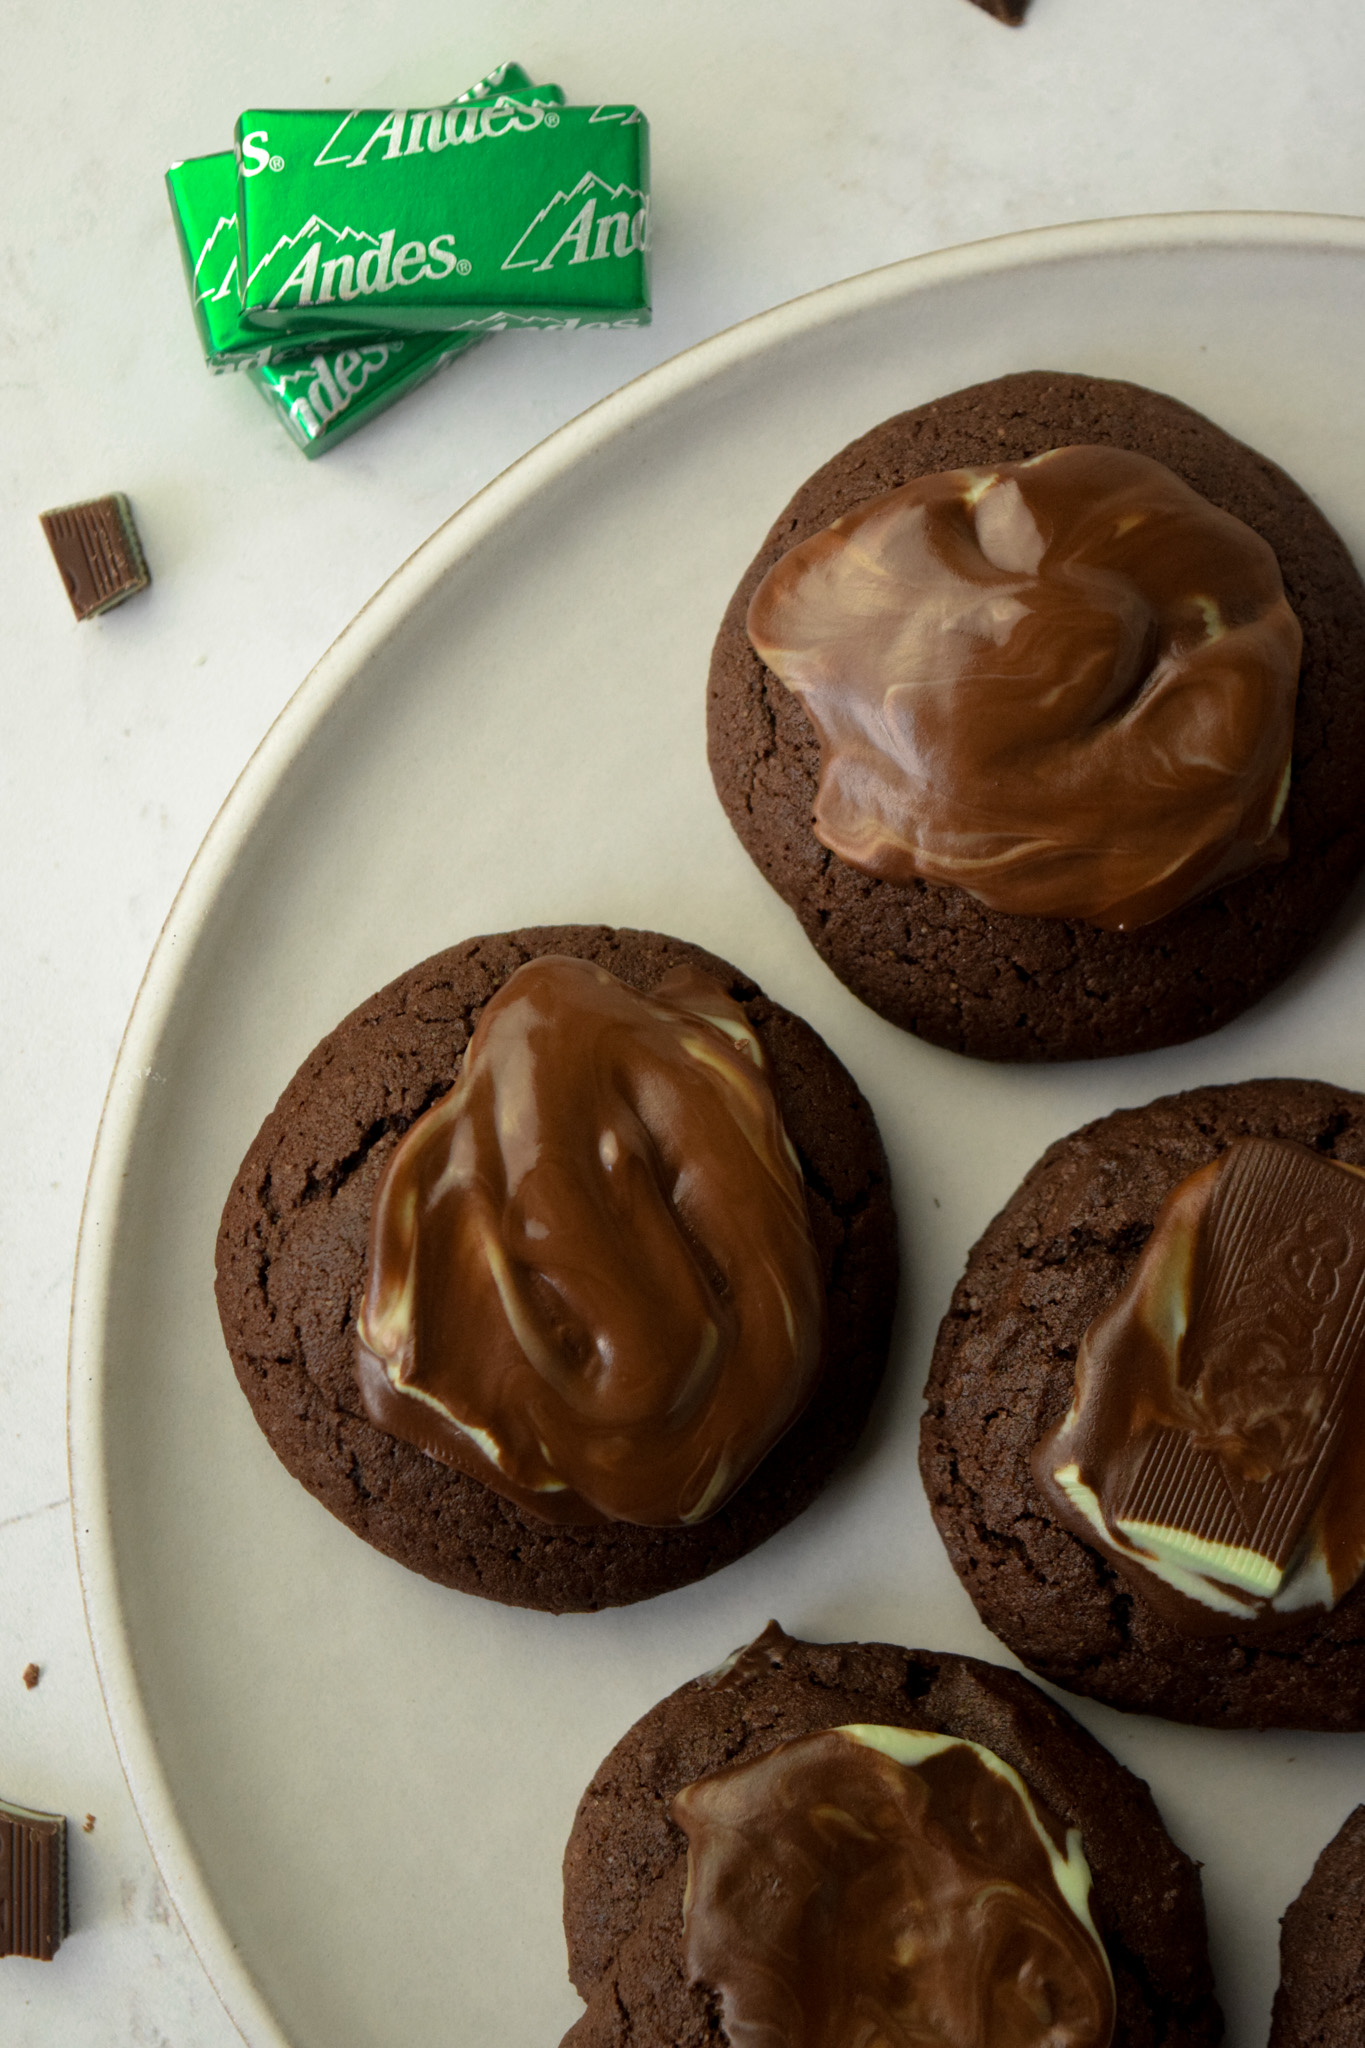 Plate of Gluten Free Chocolate Cookies with Andes Mints